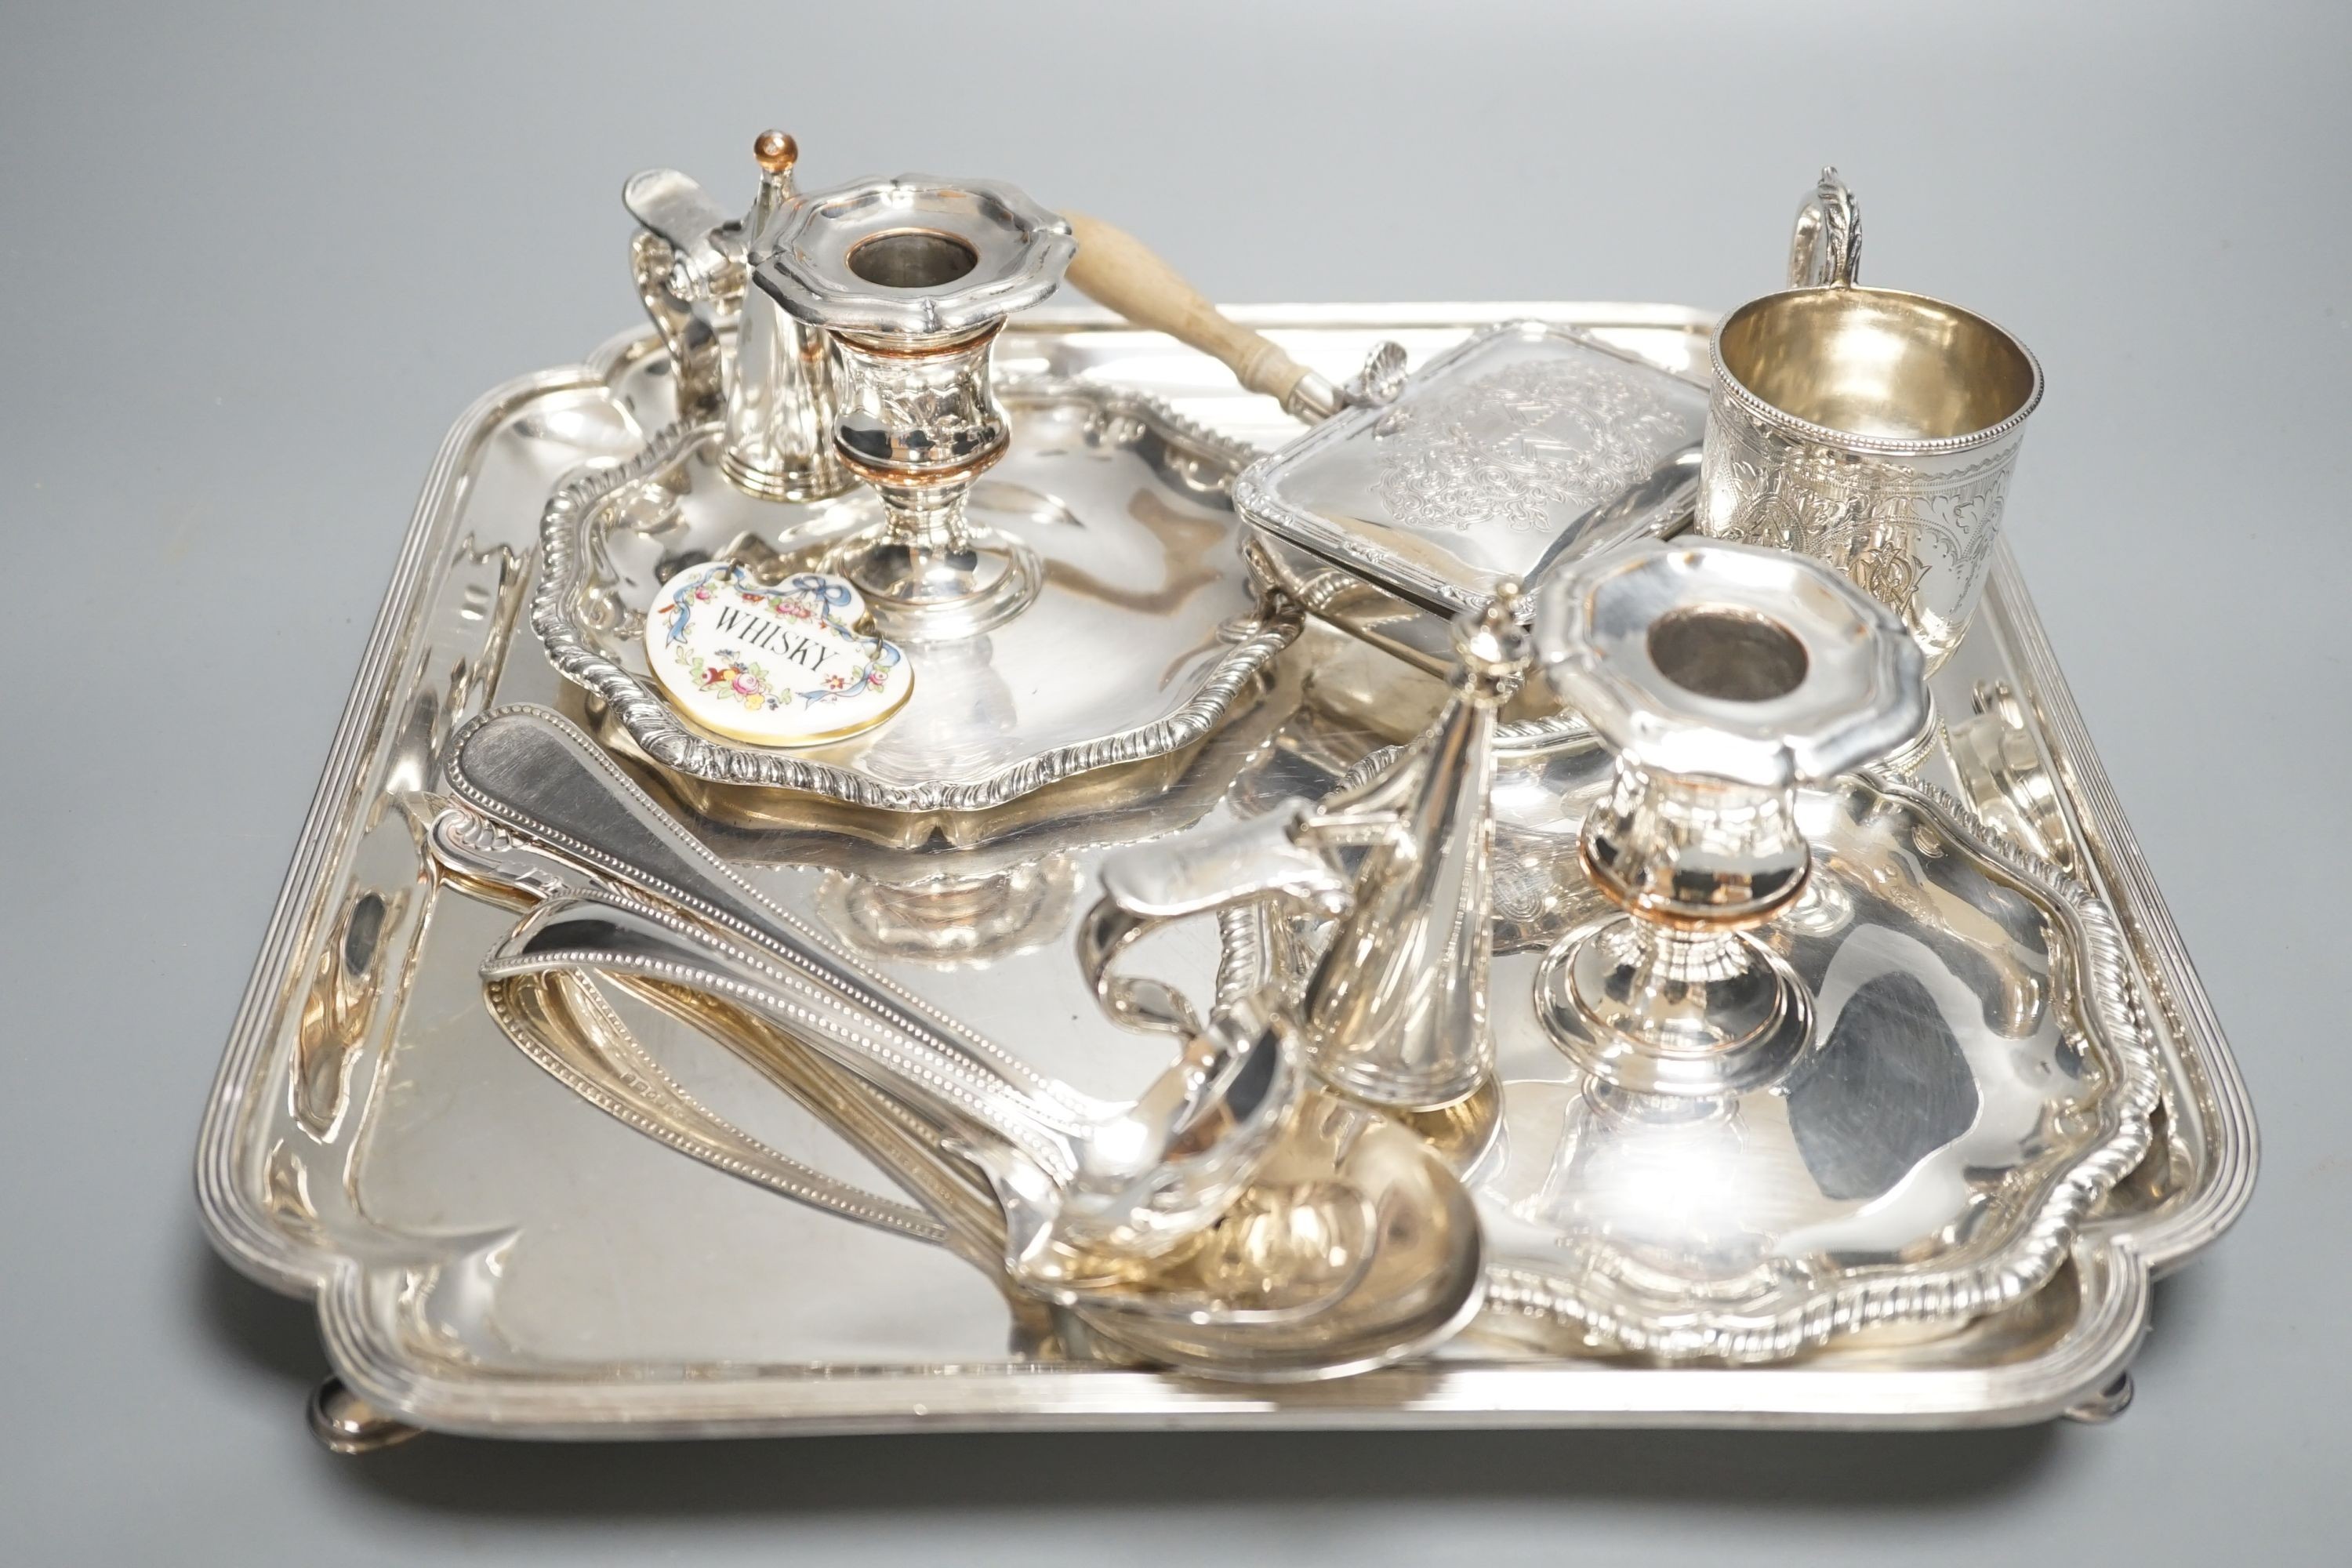 A plated salver, a pair of chambersticks and other plated flatwares